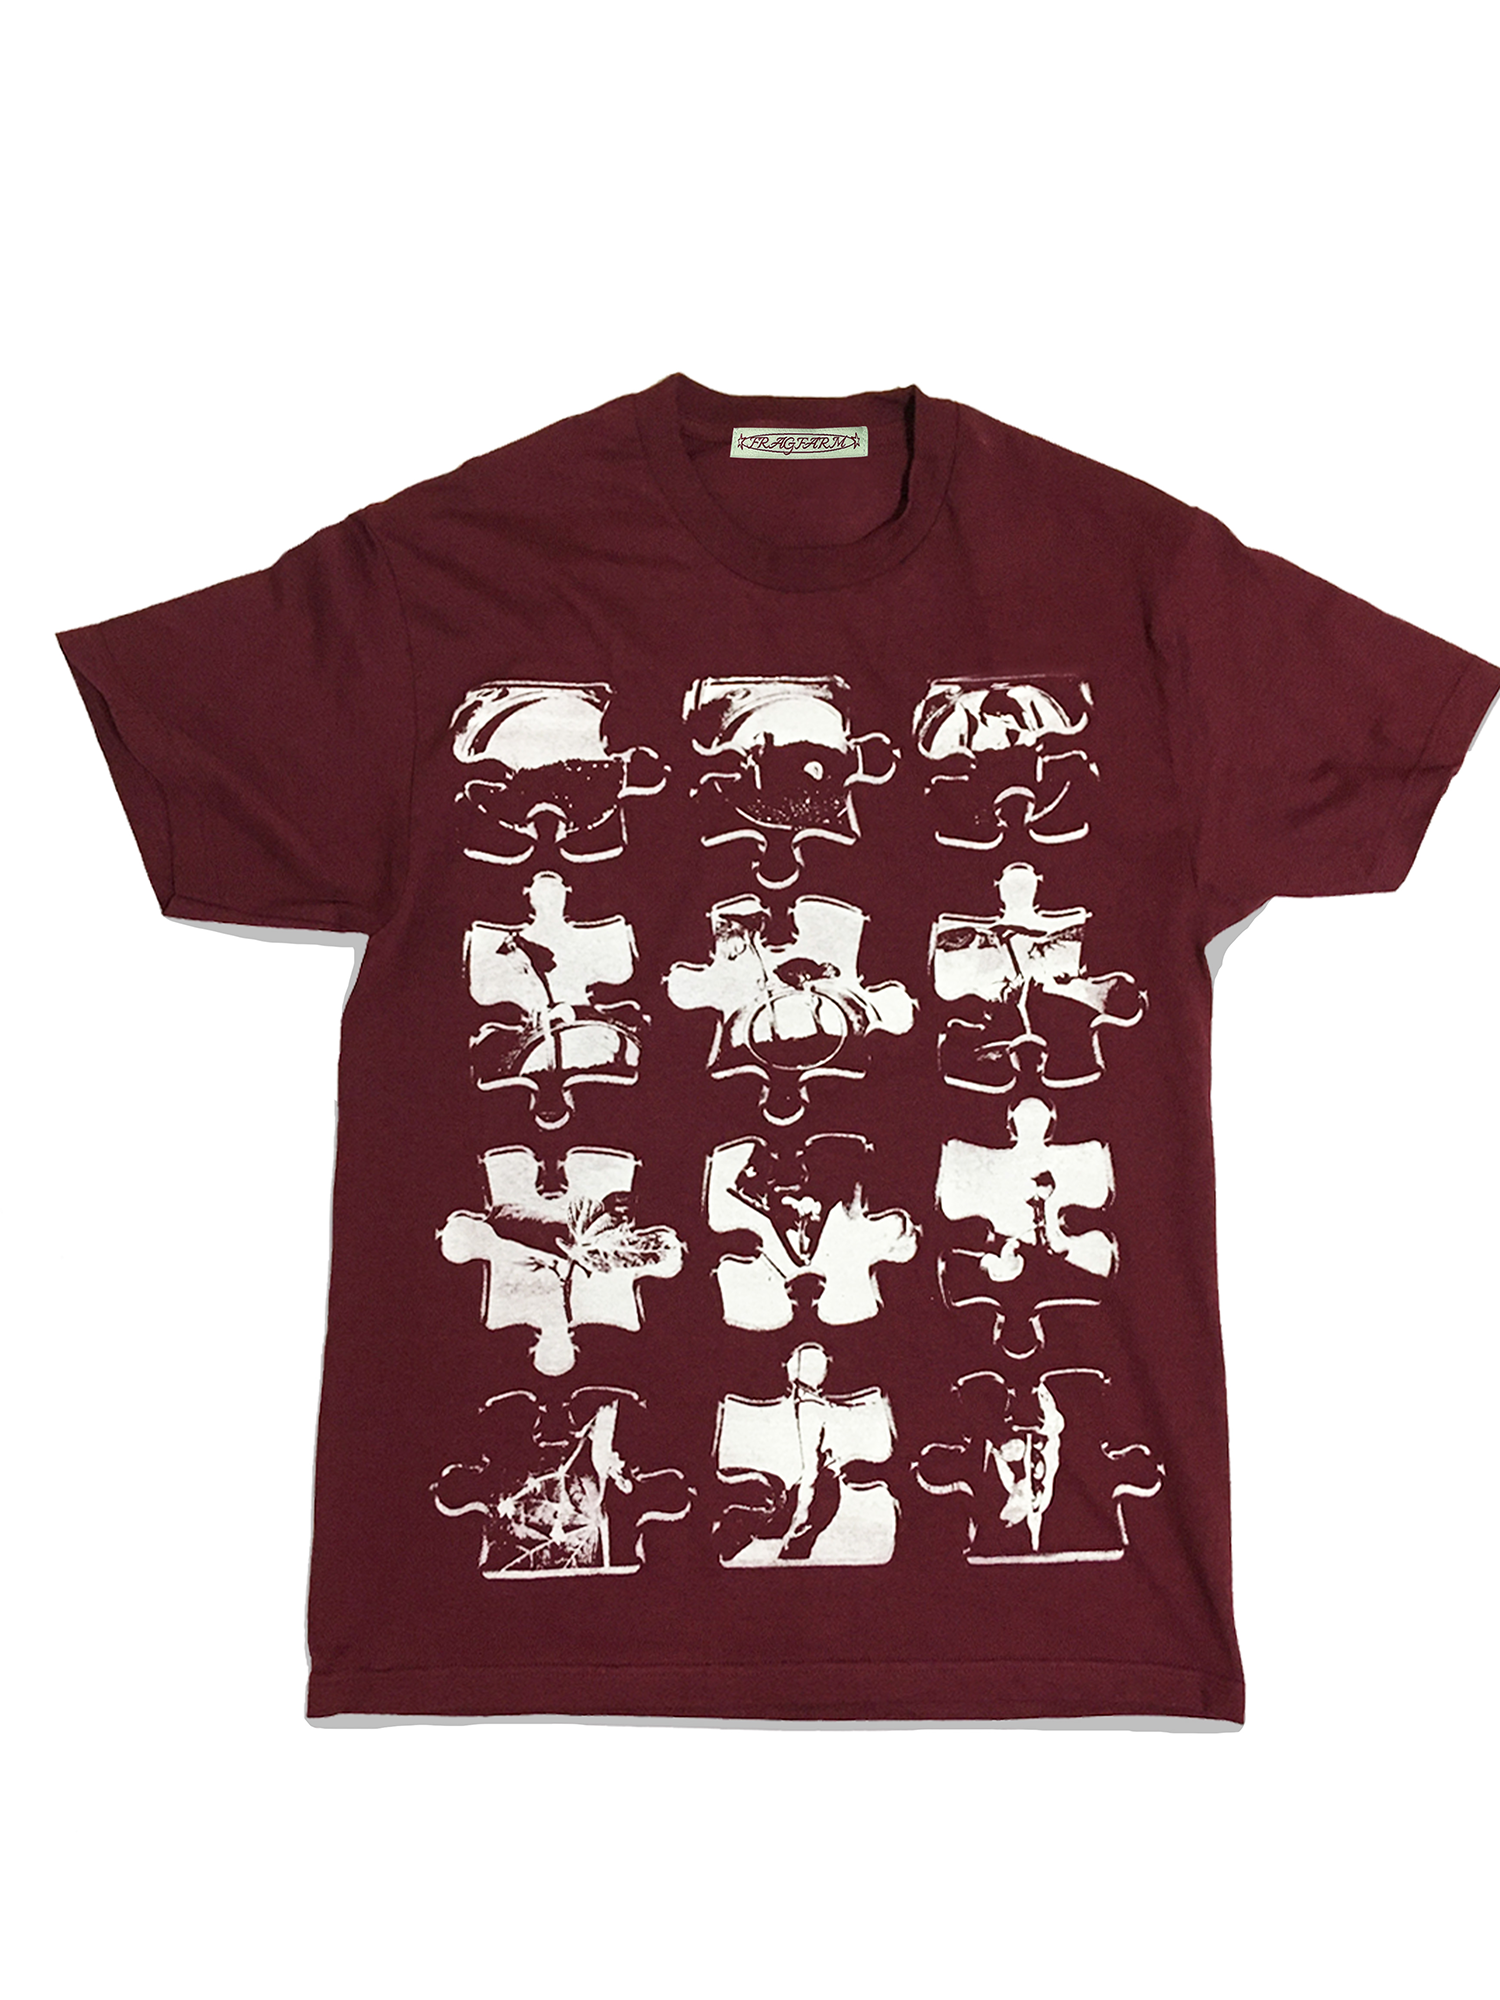 Timescape of Kidney Beans Tee - Burgundy